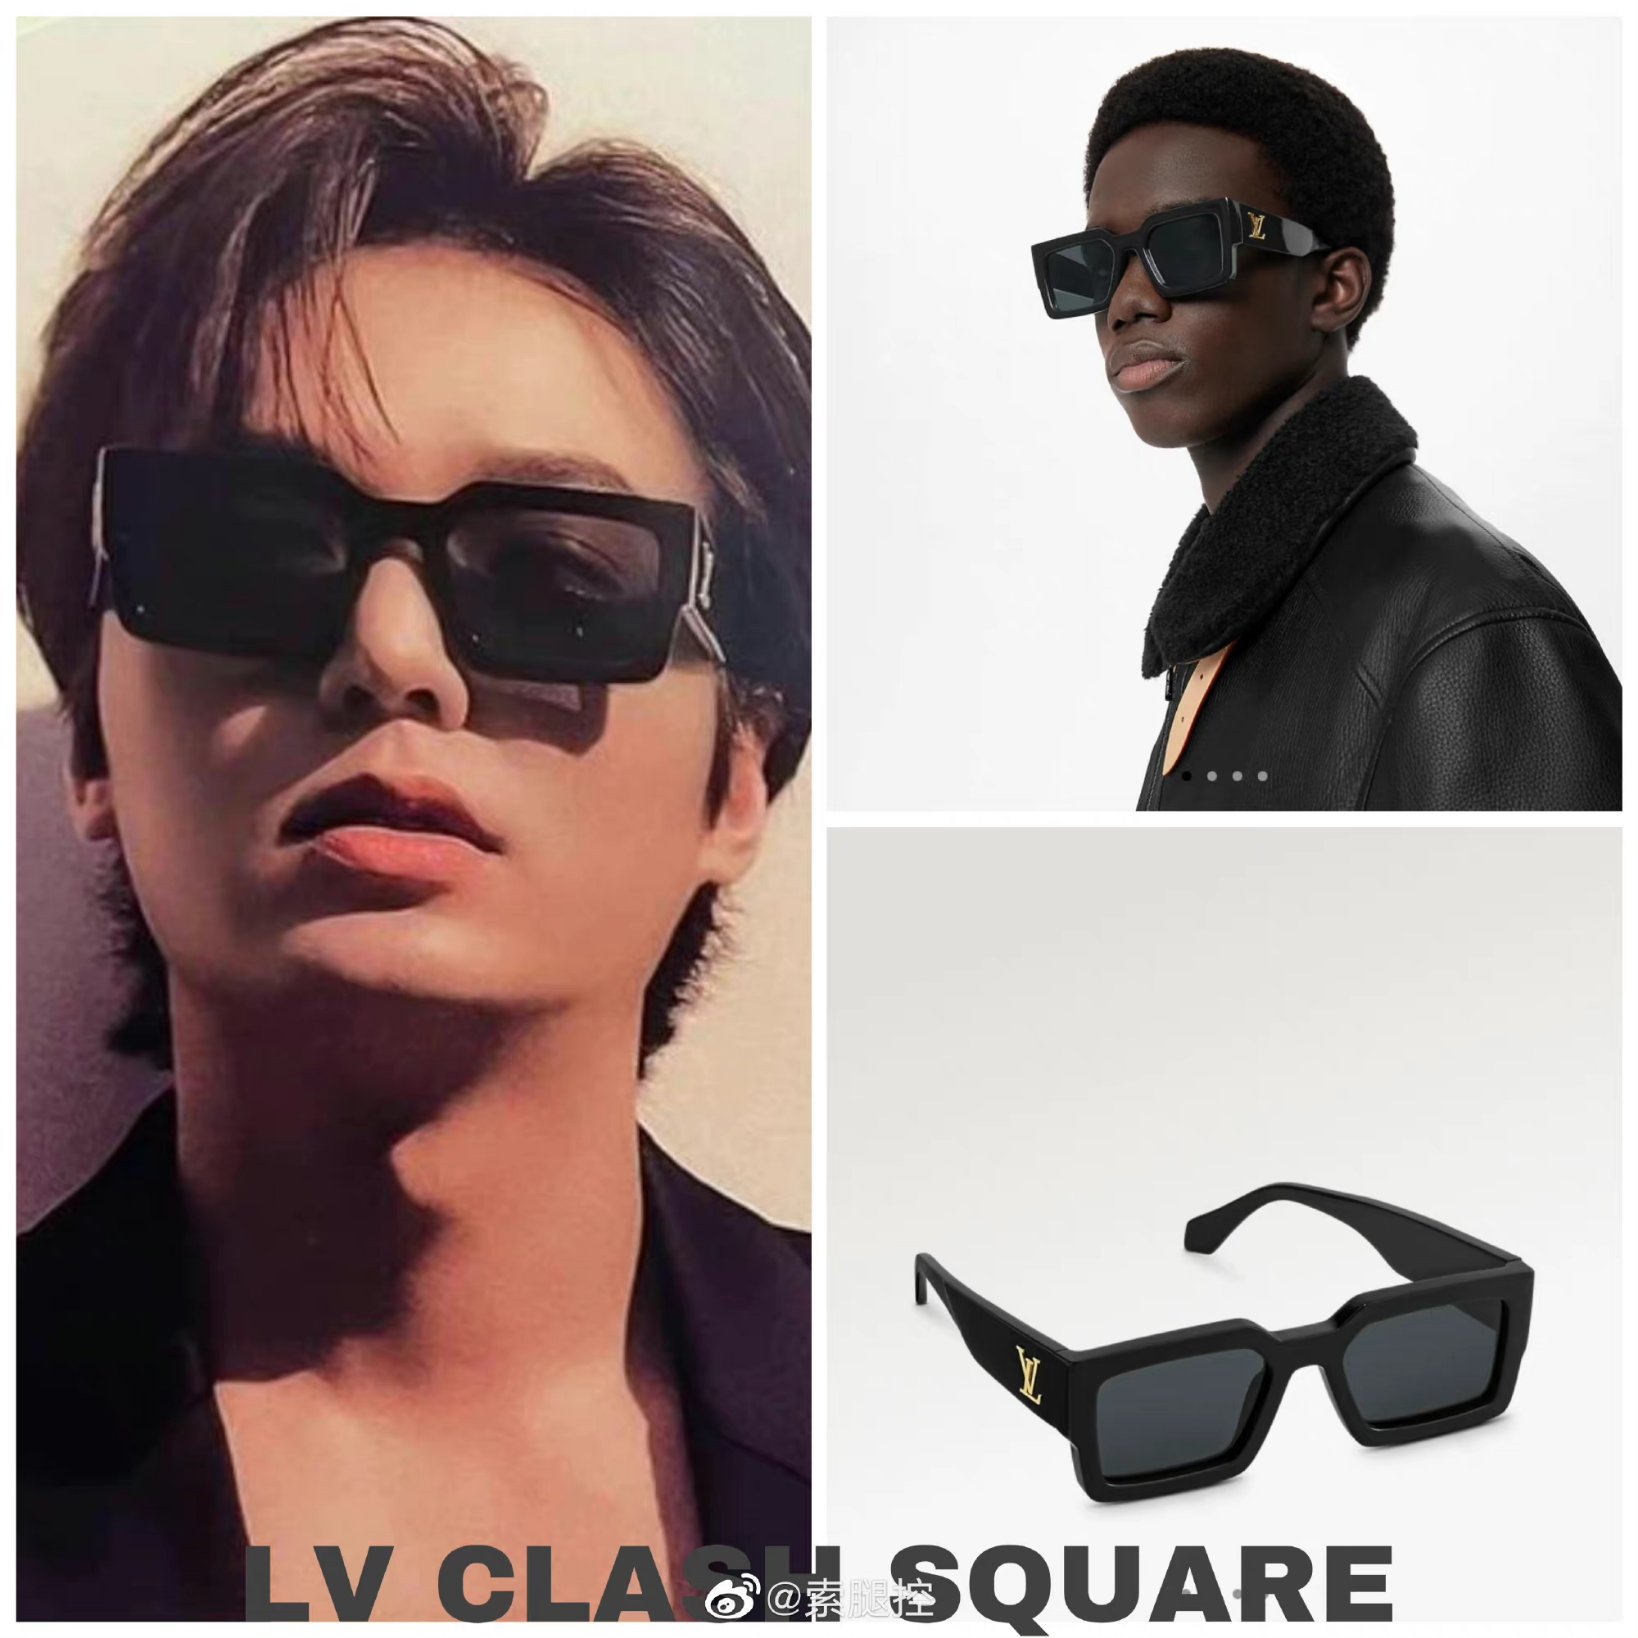 machi on X: The big star wears CLASH SQUARE Sunglasses from the